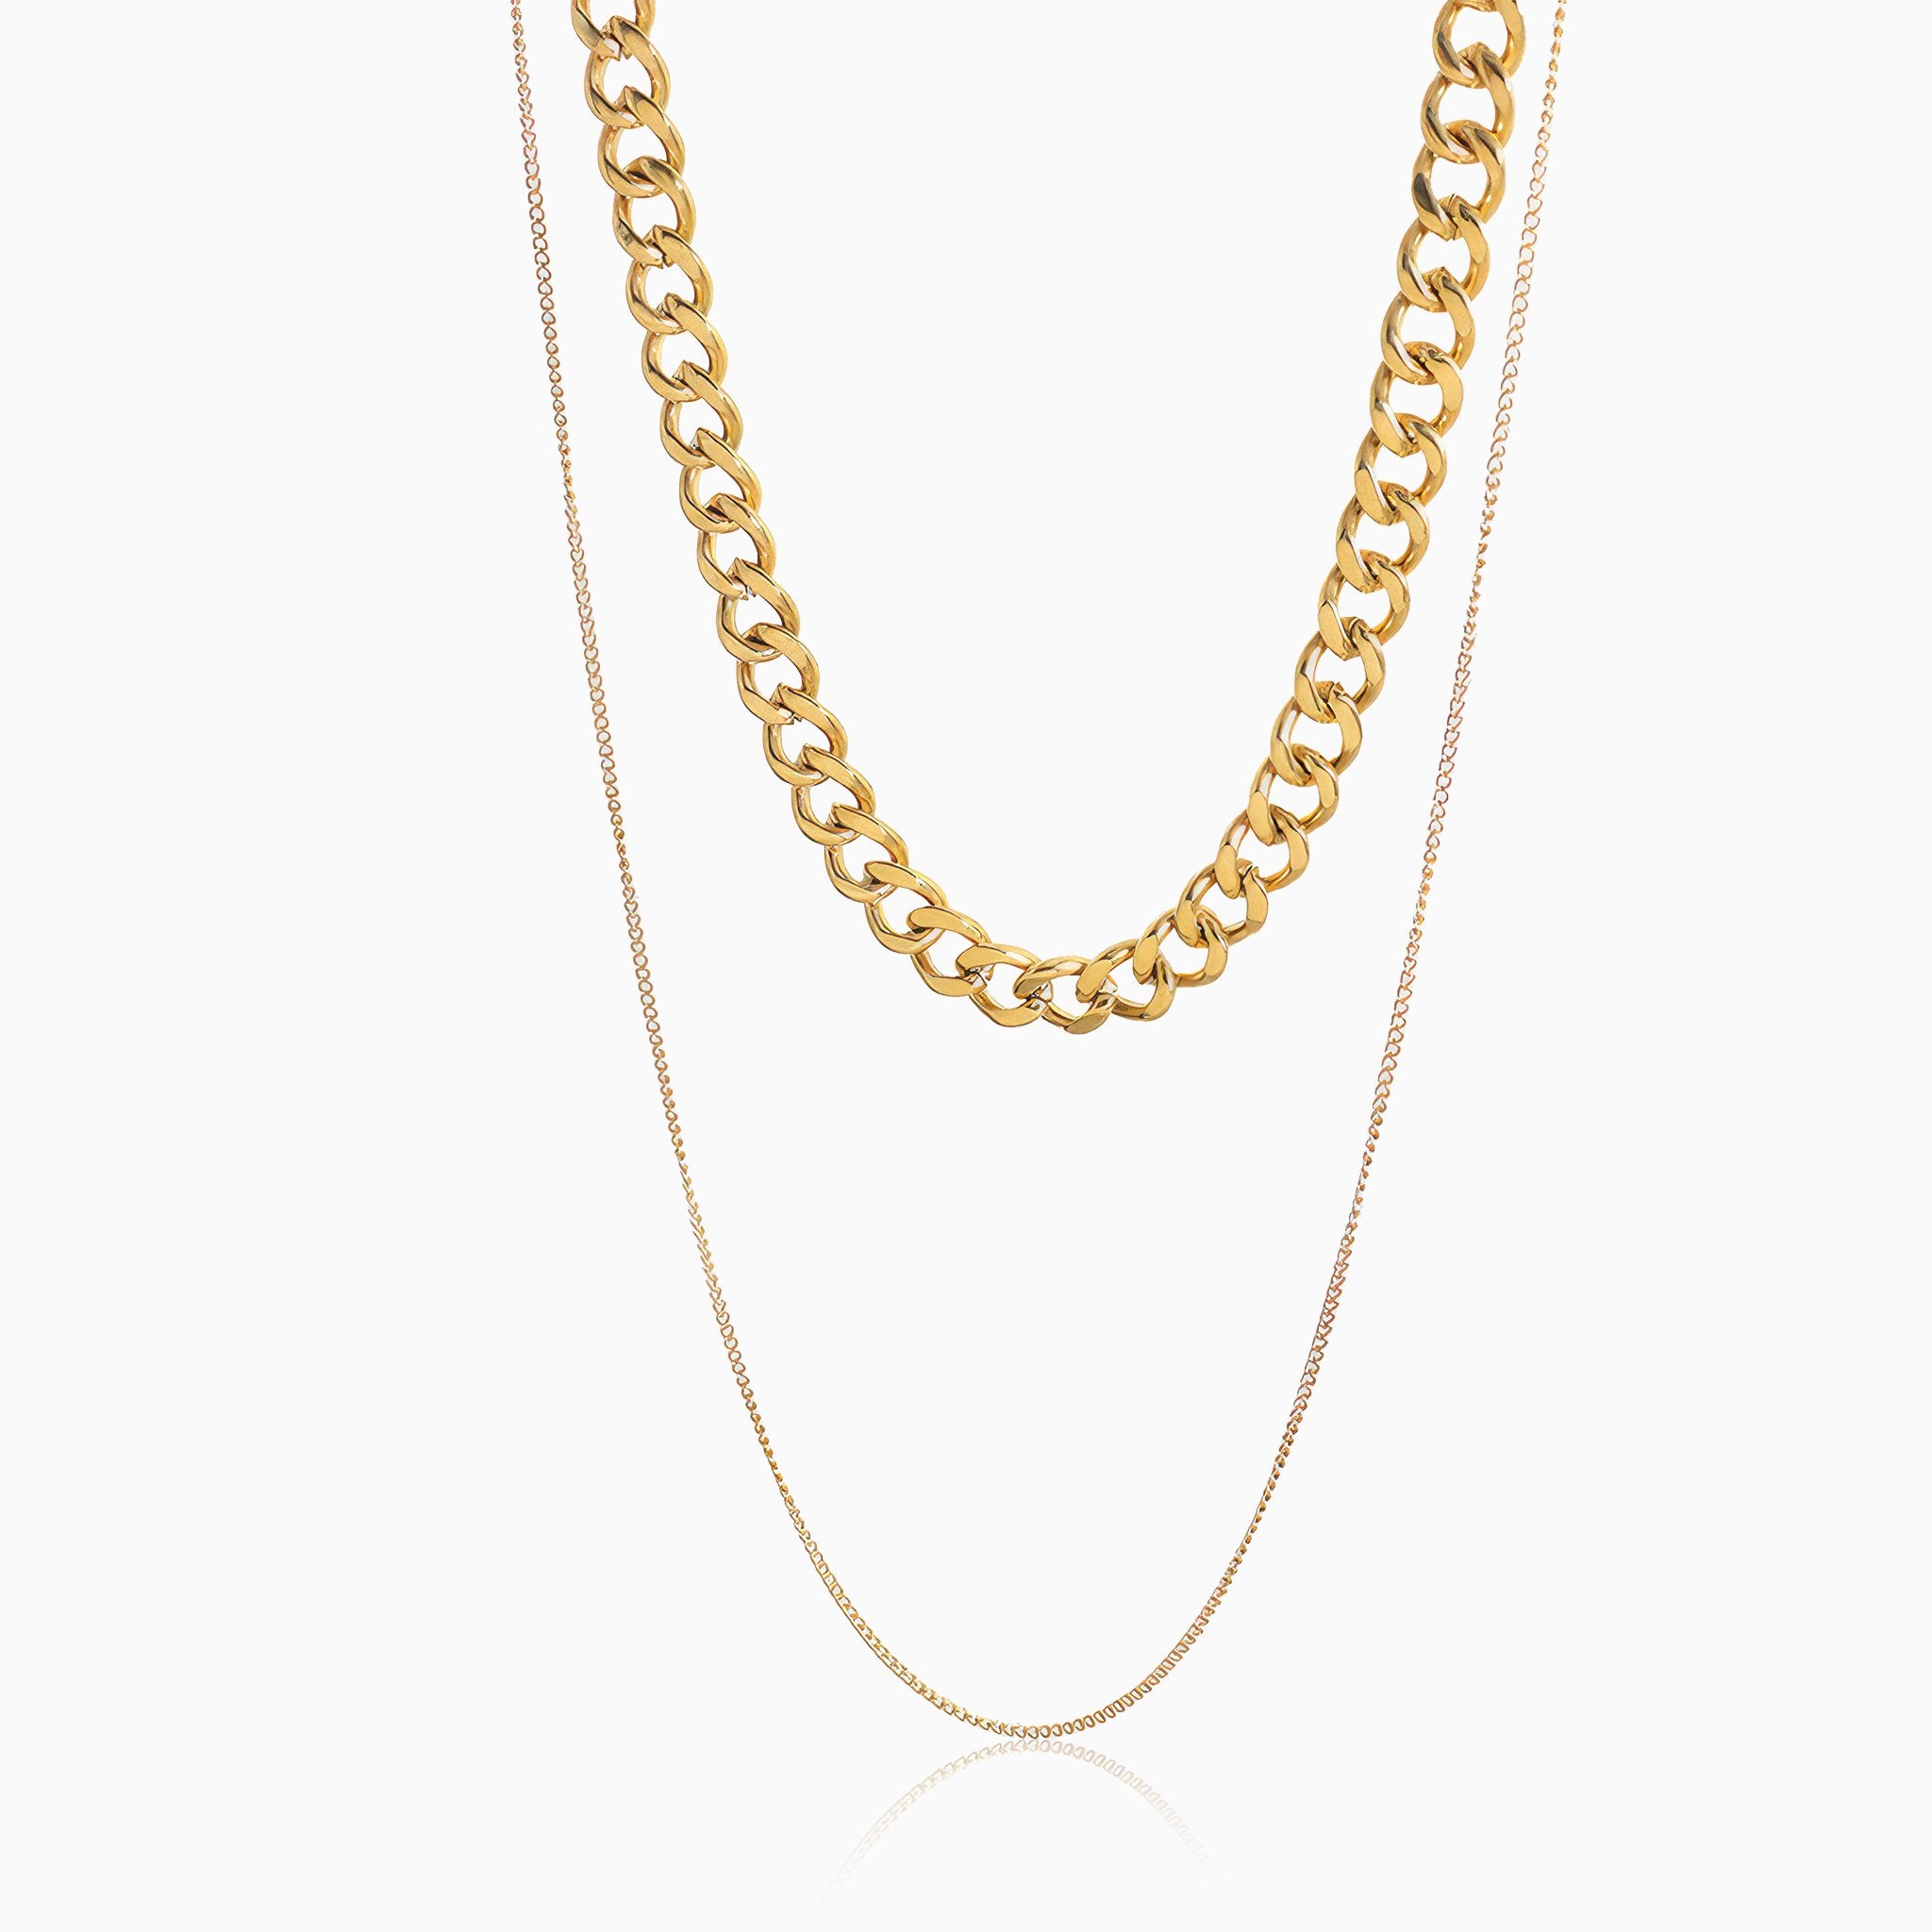 Double Layer Thick & Thin Chain Necklace - Nobbier - Necklace - 18K Gold And Titanium PVD Coated Jewelry